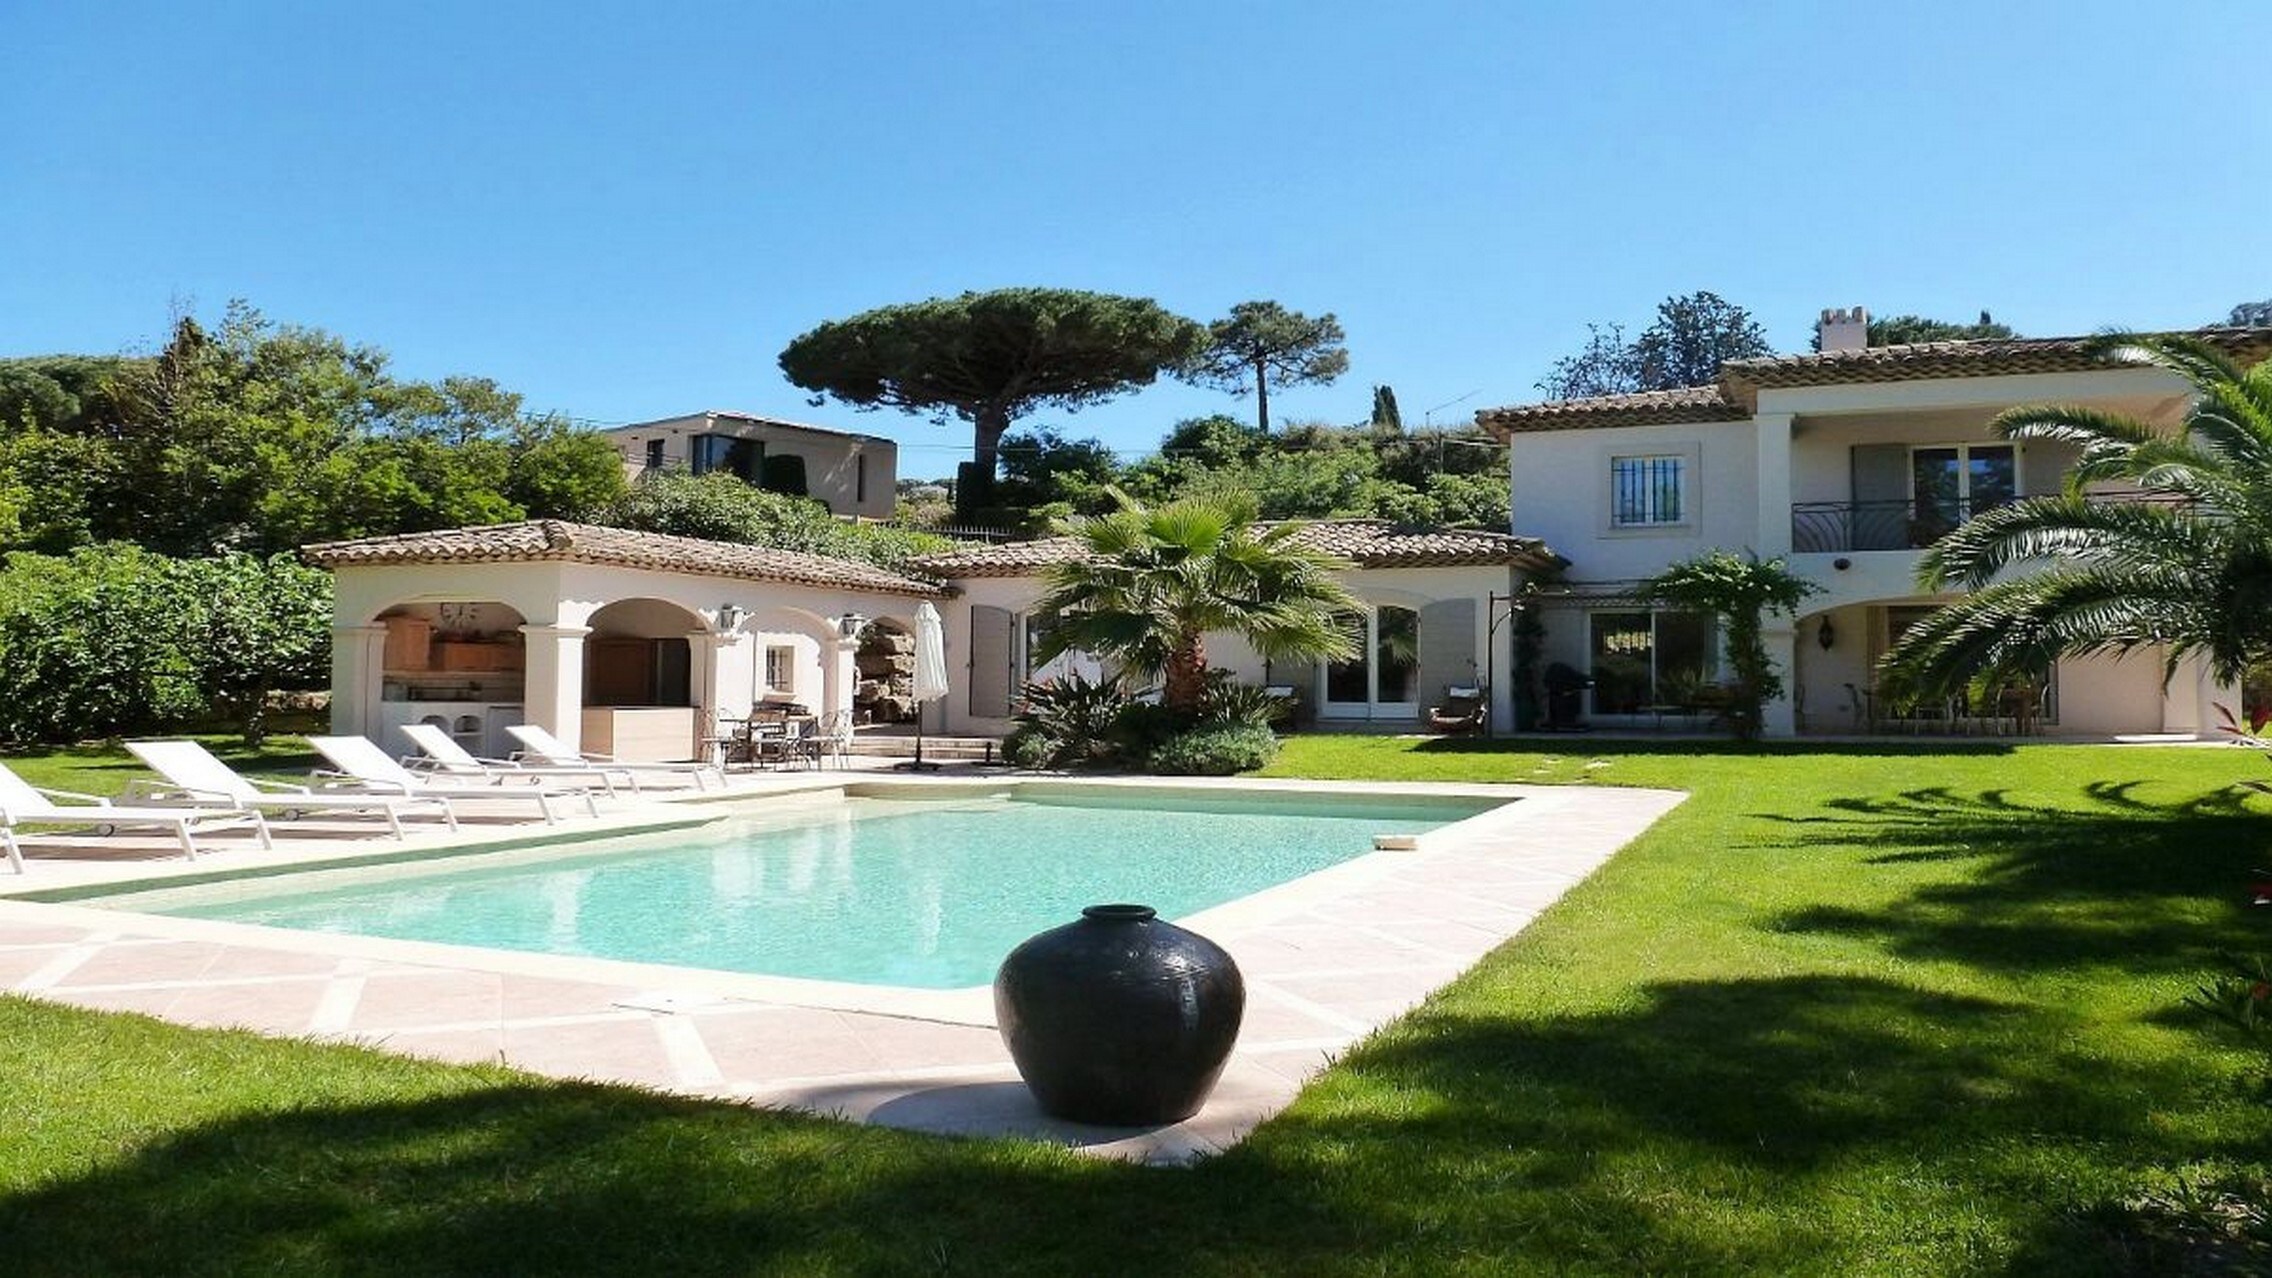 Property Image 1 - Fabulous 4 bedroom family villa with pool in Saint Tropez